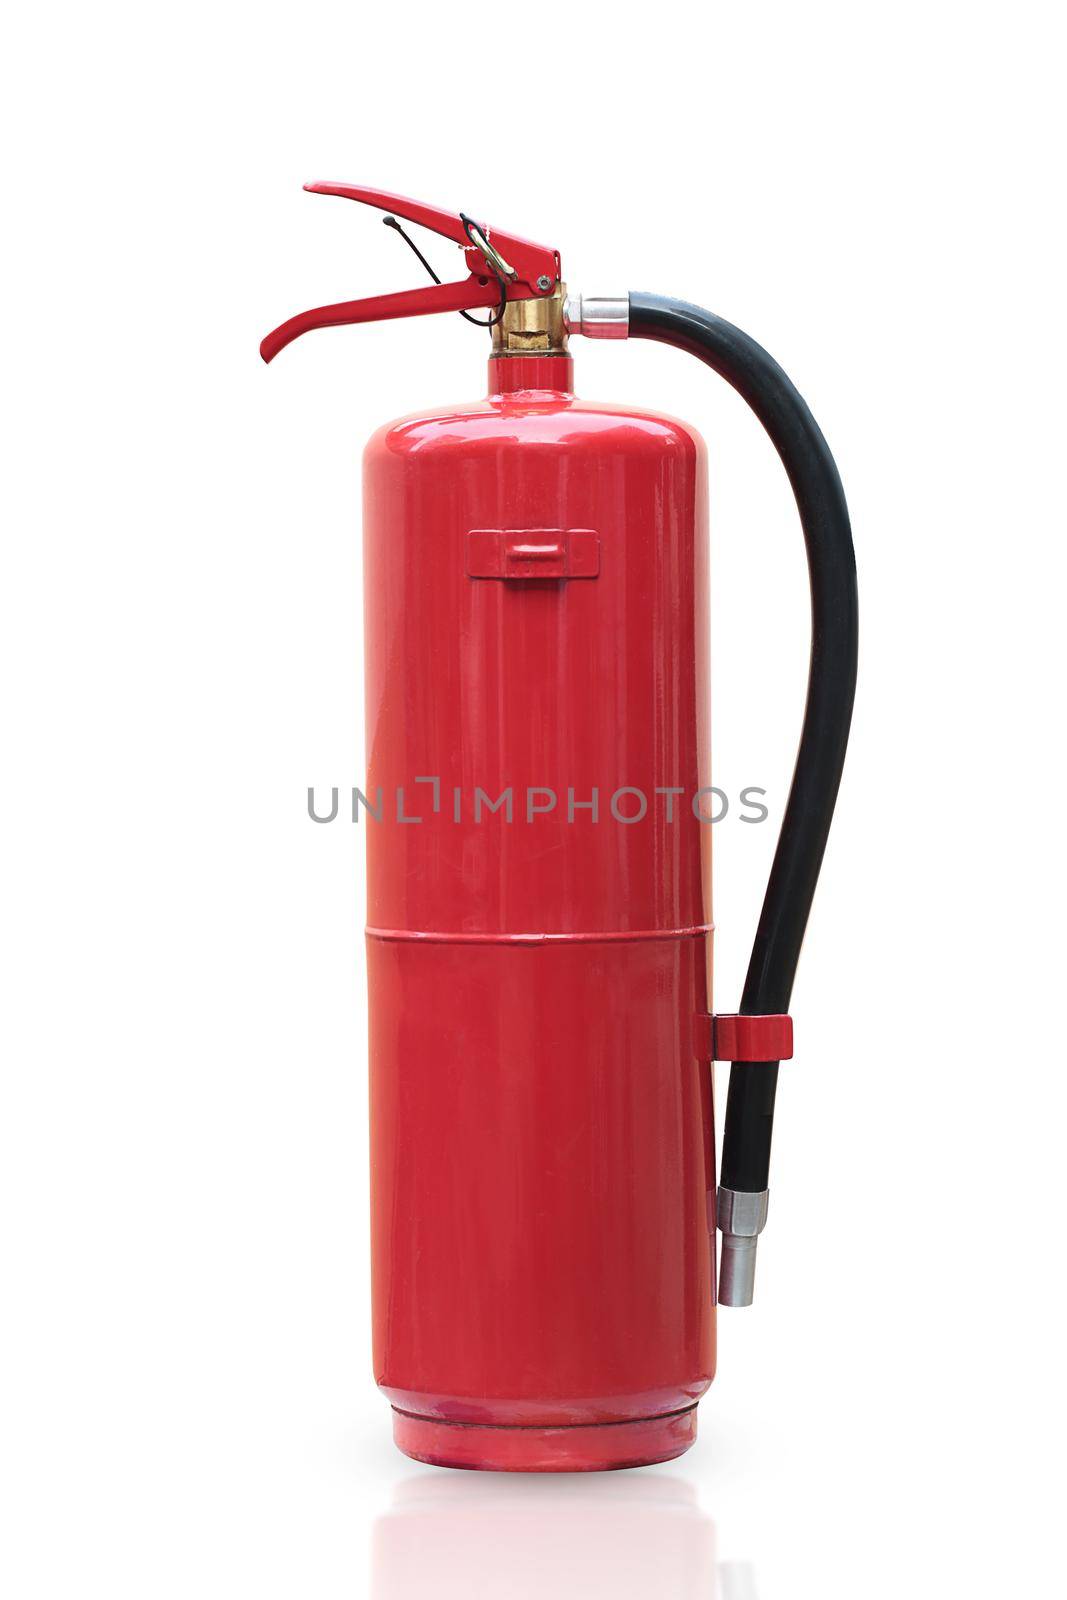 Fire extinguisher red tank isolated white background. by jayzynism